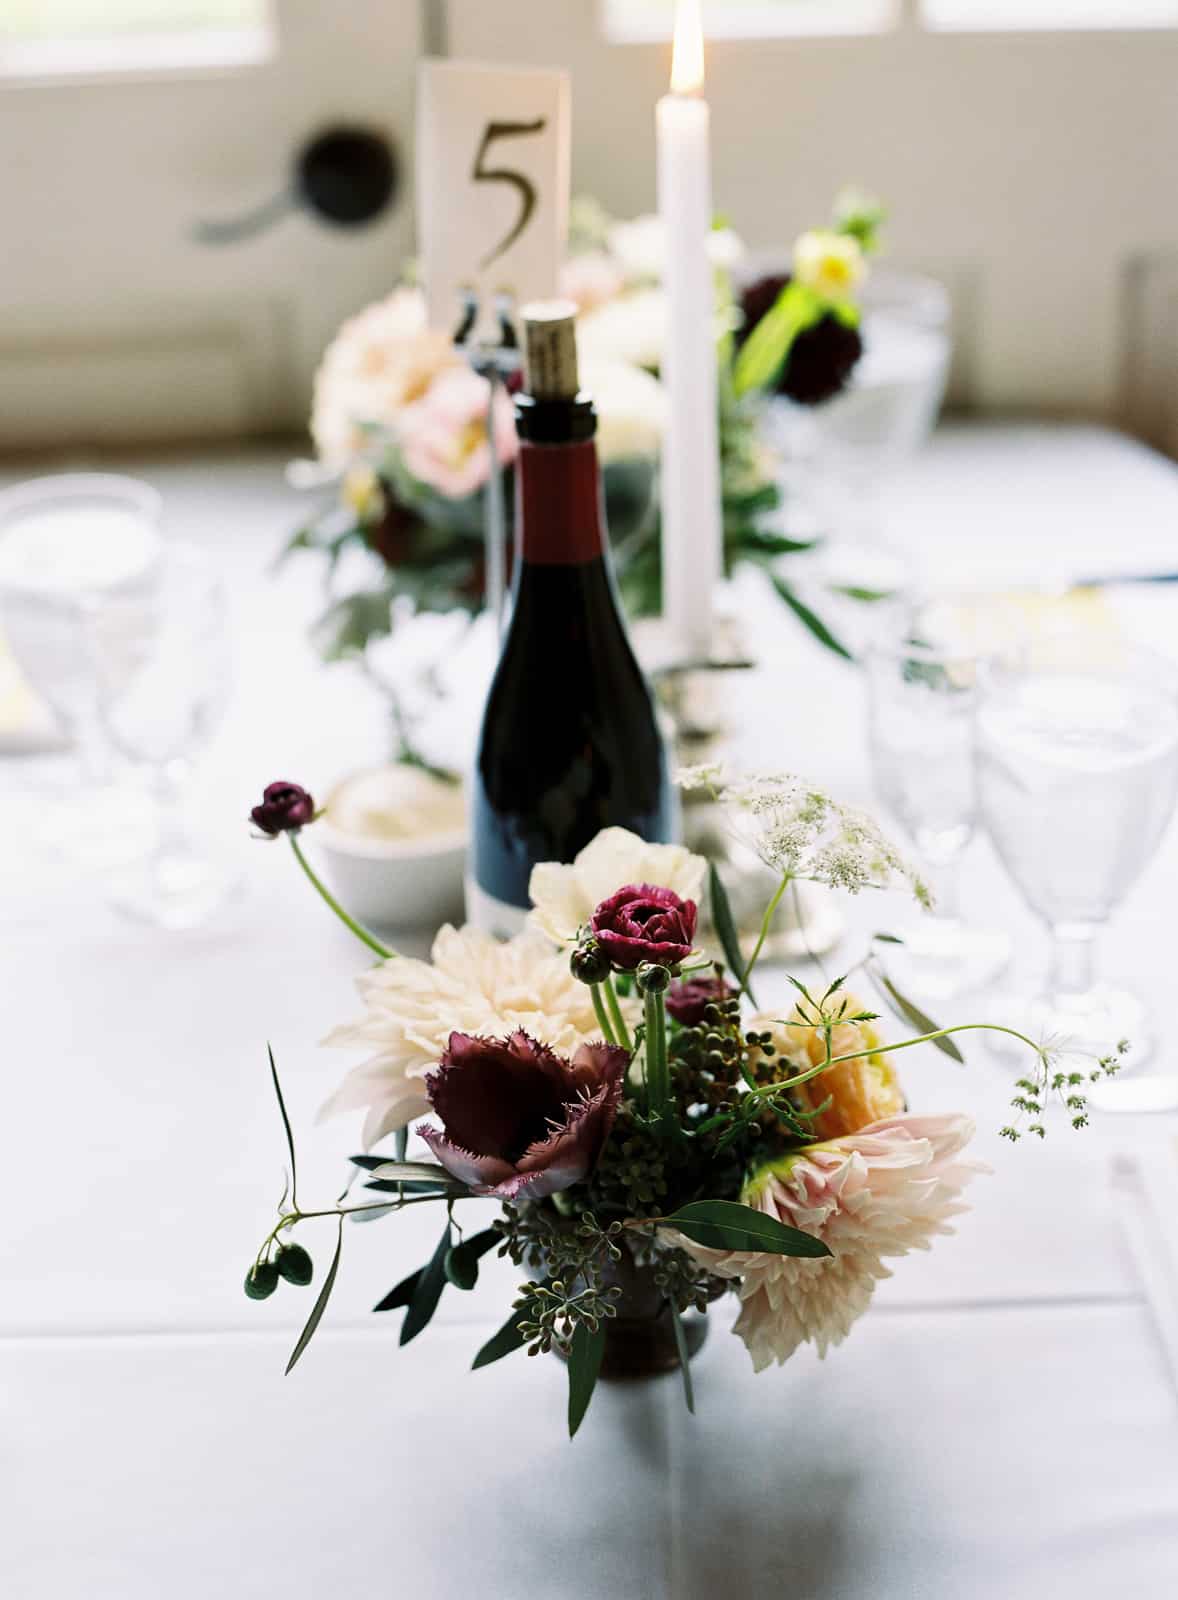 flowers and wine bottle